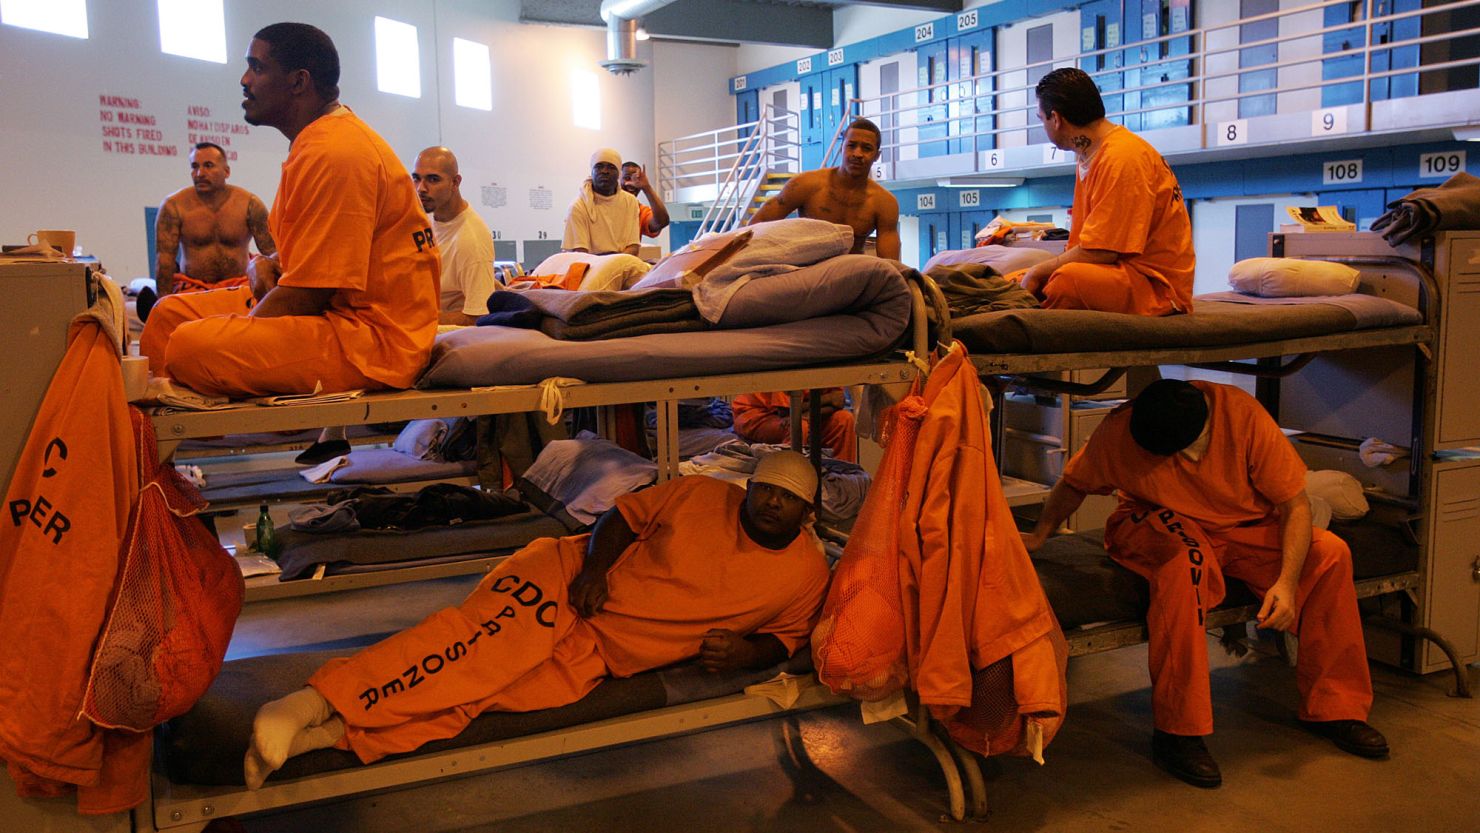 Inmates fill a converted dayroom, which is being used as temporary "emergency" sleeping area at California State Prison-Los Angeles County in Lancaster, California. 